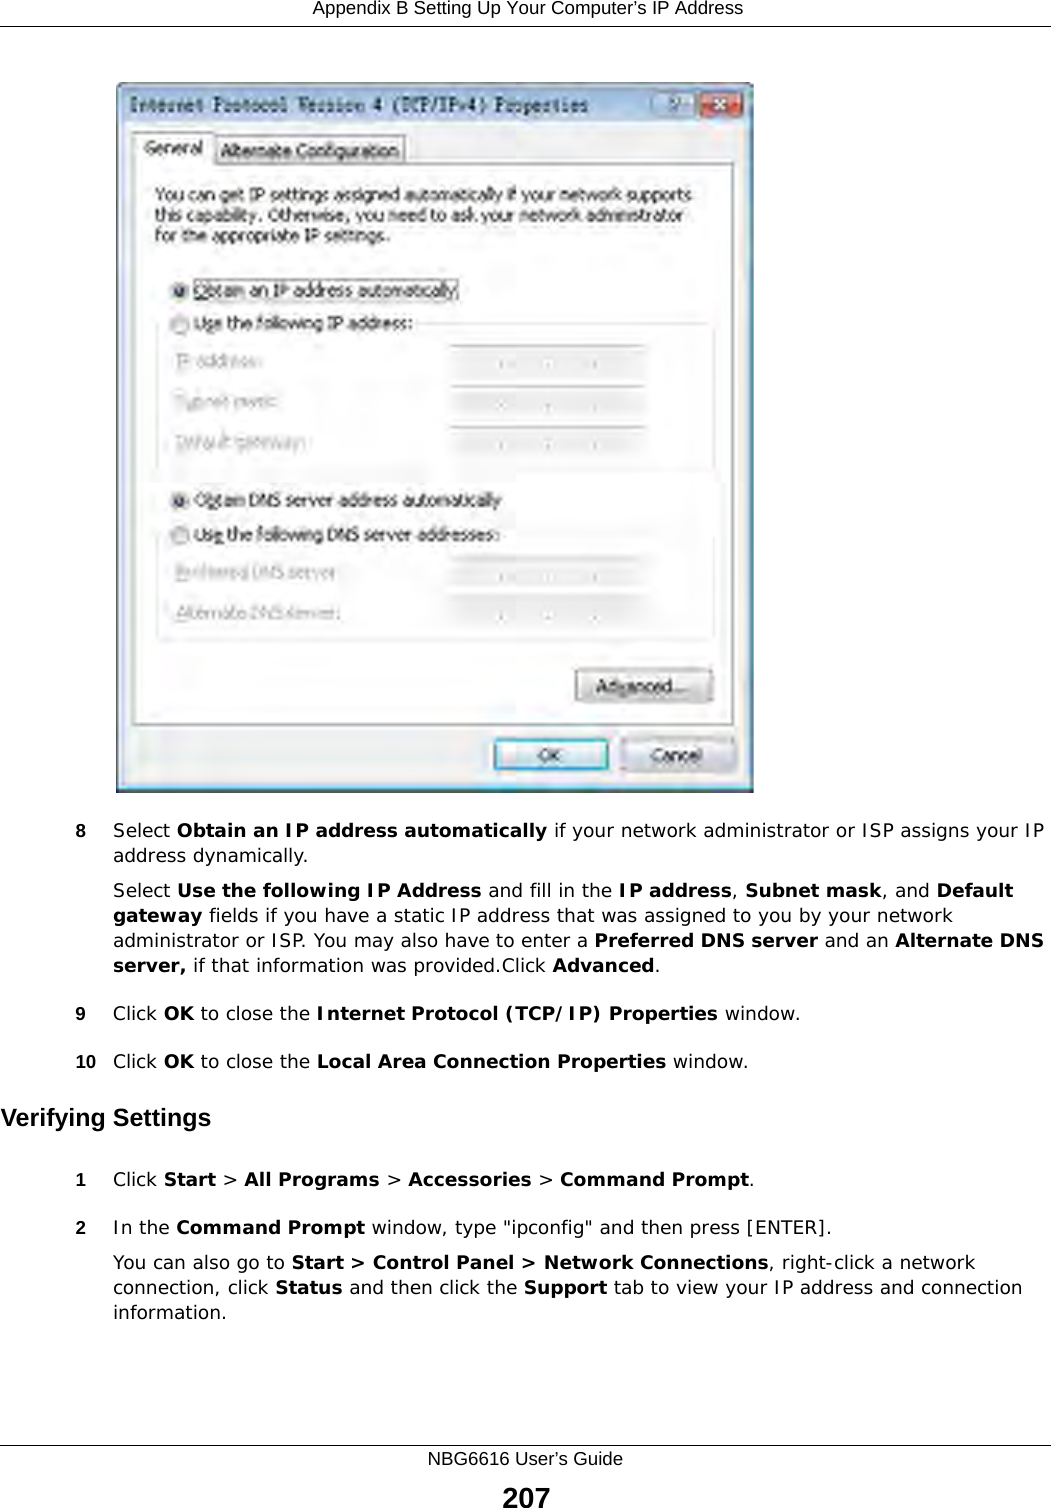  Appendix B Setting Up Your Computer’s IP AddressNBG6616 User’s Guide2078Select Obtain an IP address automatically if your network administrator or ISP assigns your IP address dynamically.Select Use the following IP Address and fill in the IP address, Subnet mask, and Default gateway fields if you have a static IP address that was assigned to you by your network administrator or ISP. You may also have to enter a Preferred DNS server and an Alternate DNS server, if that information was provided.Click Advanced.9Click OK to close the Internet Protocol (TCP/IP) Properties window.10 Click OK to close the Local Area Connection Properties window.Verifying Settings1Click Start &gt; All Programs &gt; Accessories &gt; Command Prompt.2In the Command Prompt window, type &quot;ipconfig&quot; and then press [ENTER]. You can also go to Start &gt; Control Panel &gt; Network Connections, right-click a network connection, click Status and then click the Support tab to view your IP address and connection information.